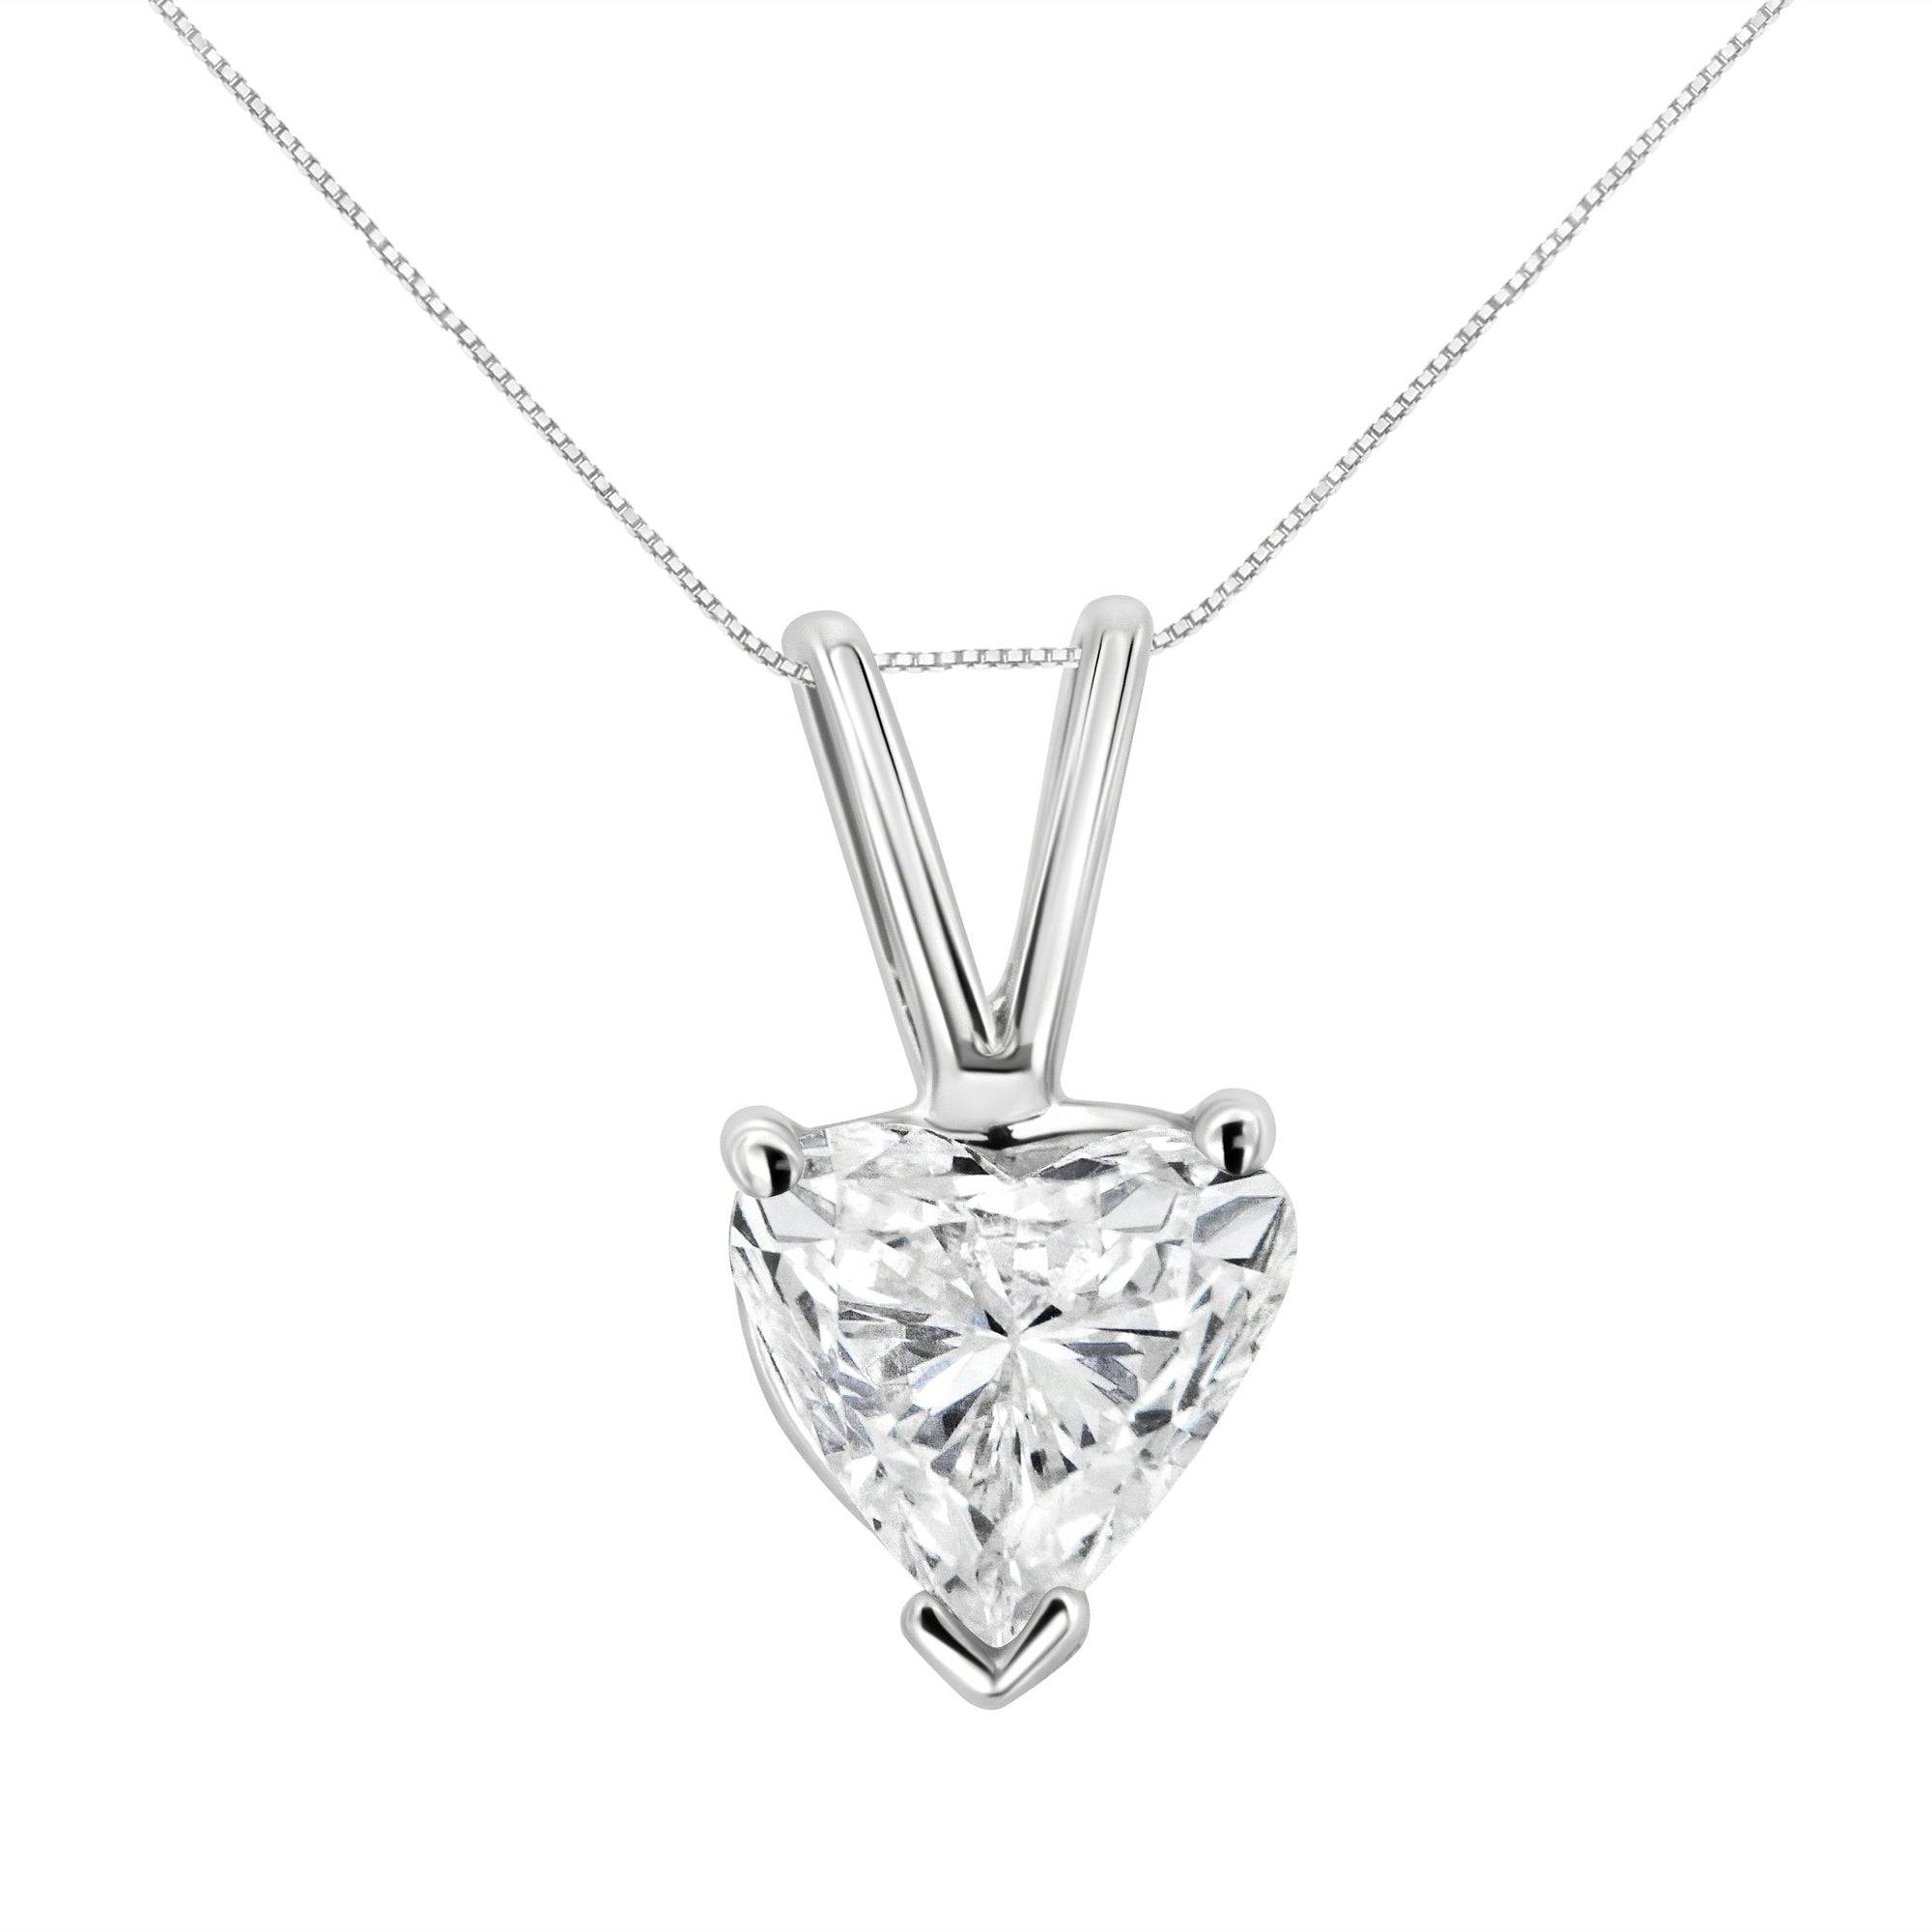 14K White Gold 1/5 Cttw 3-Prong Set Heart Shaped Solitaire Lab Grown Diamond 18" Pendant Necklace (F-G Color, VS2-SI1 Clarity) - LinkagejewelrydesignLinkagejewelrydesign